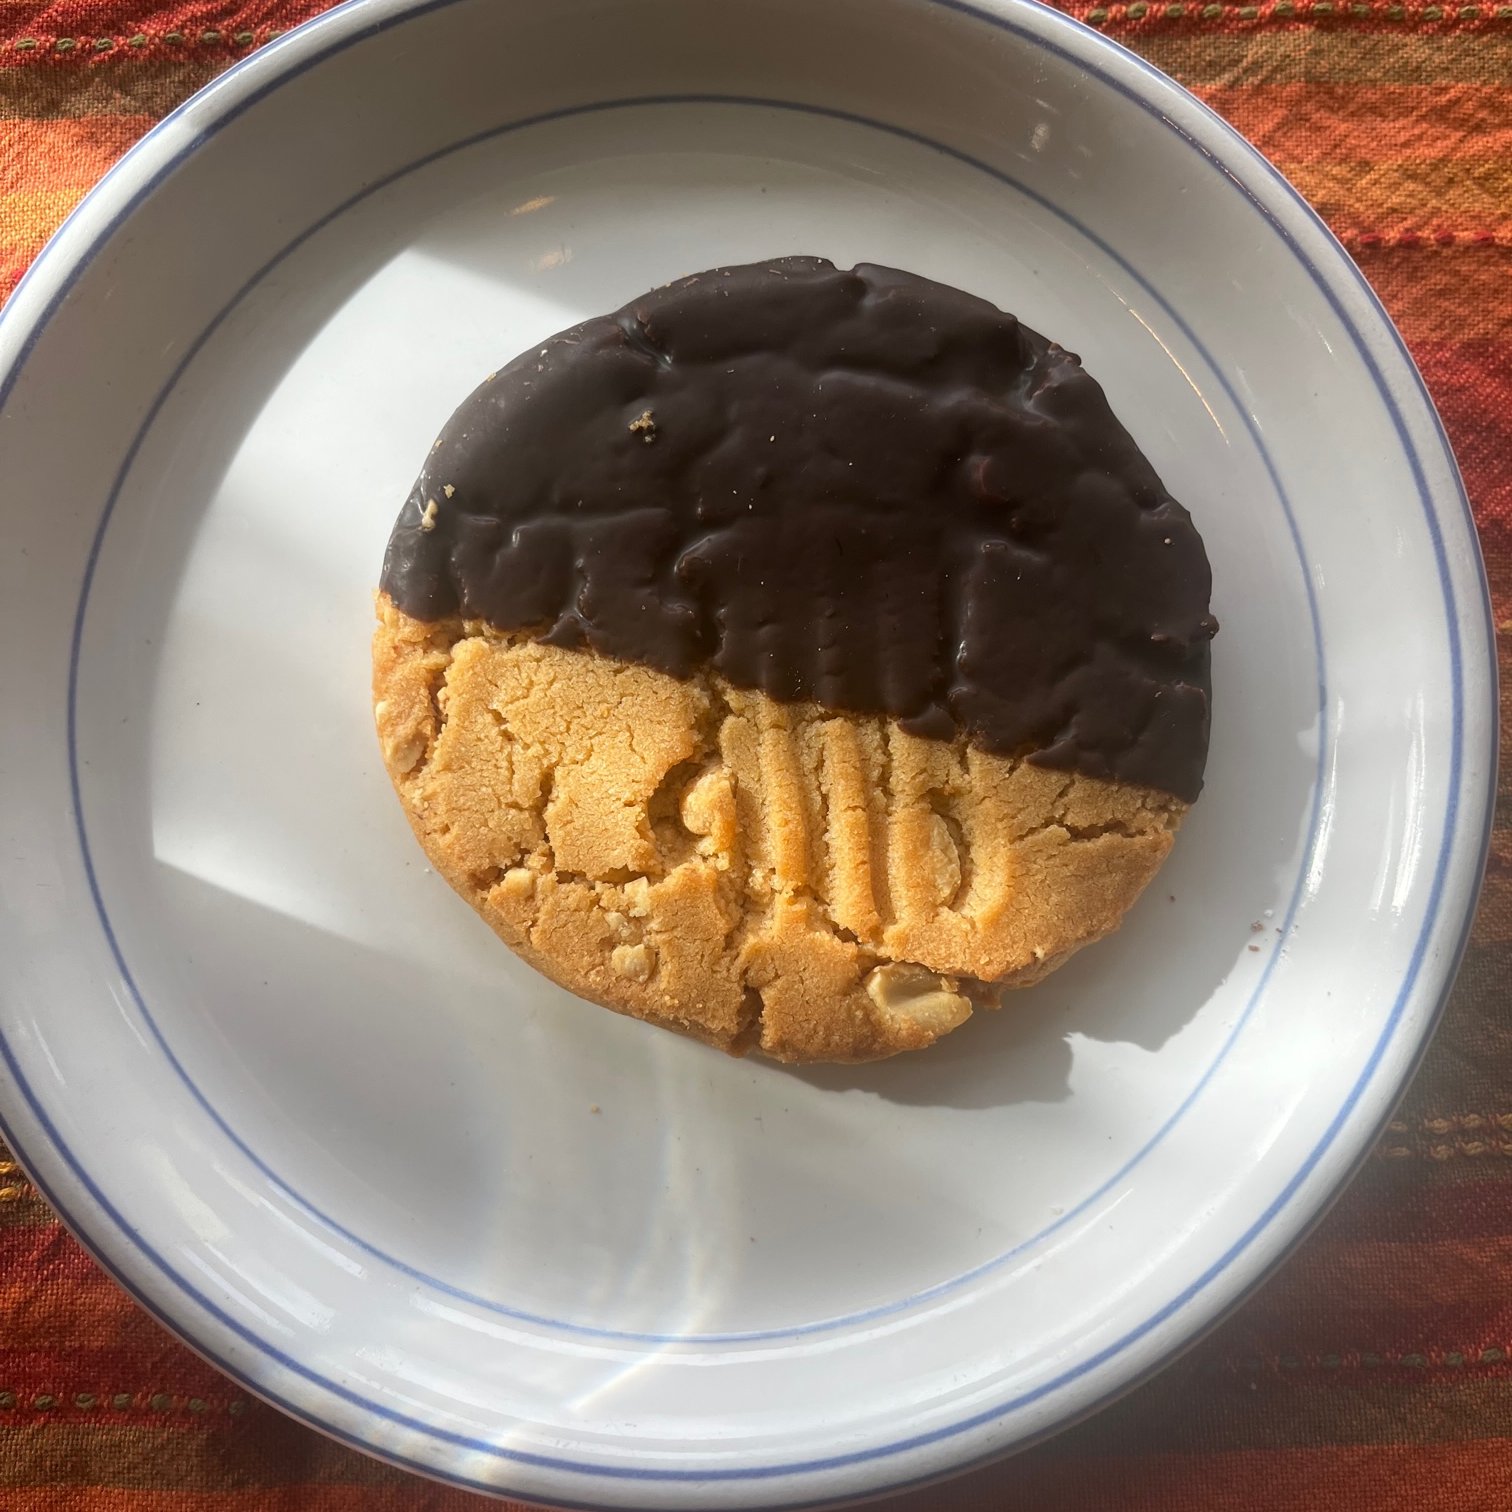 Peanut Butter Cookie dipped in chocolate